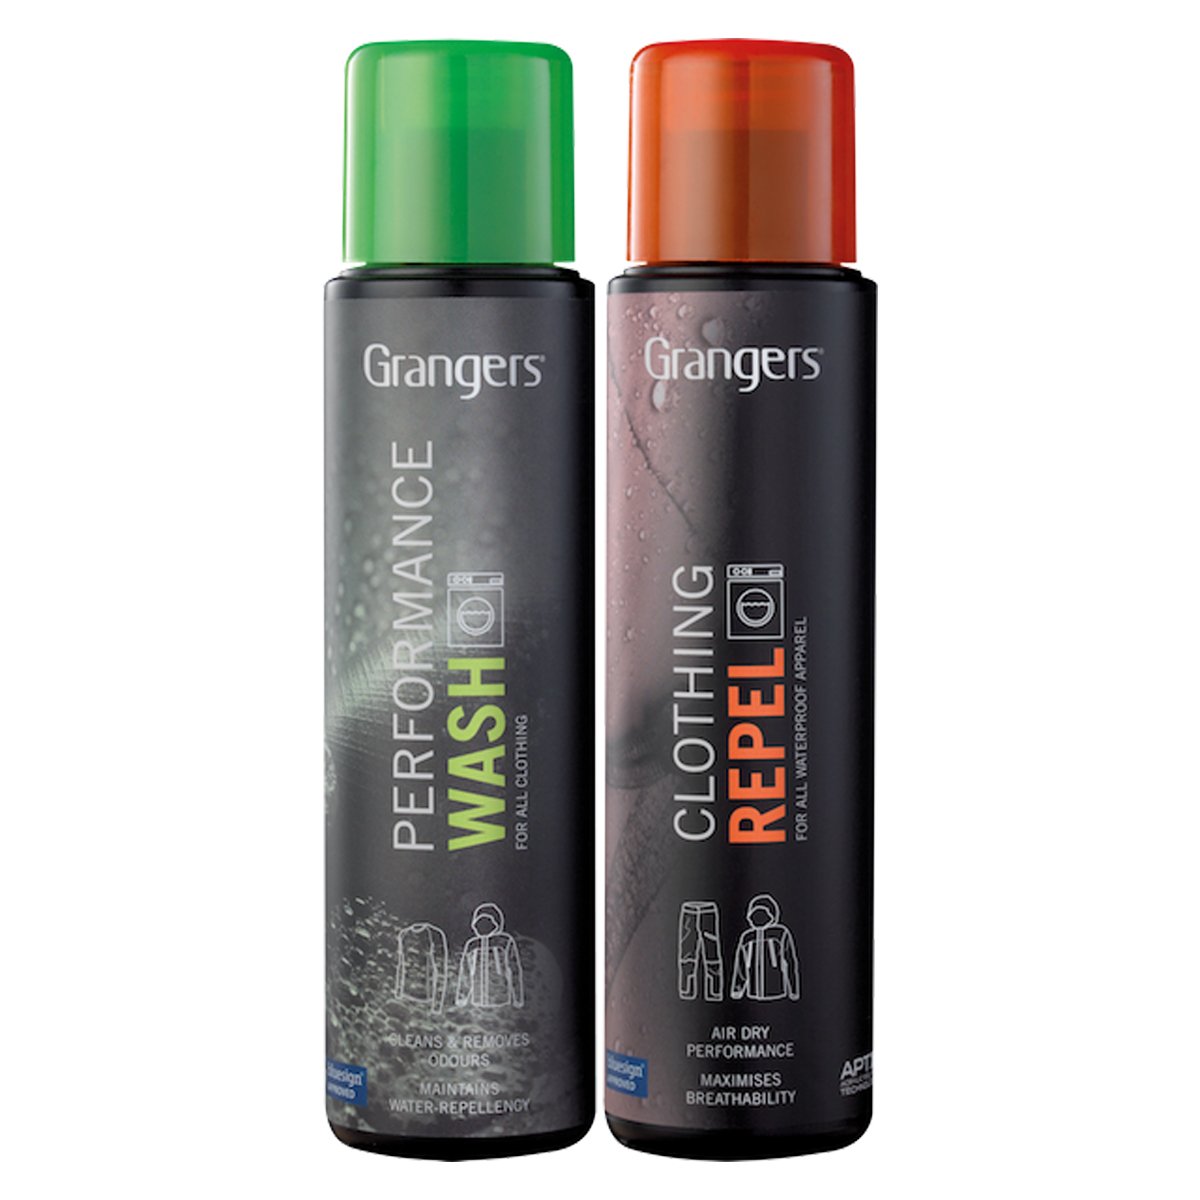 Grangers Performance Wash & Clothing Repel Combo Pack in Grangers Performance Wash & Clothing Repel Combo Pack by Grangers | Apparel - goHUNT Shop by GOHUNT | Grangers - GOHUNT Shop